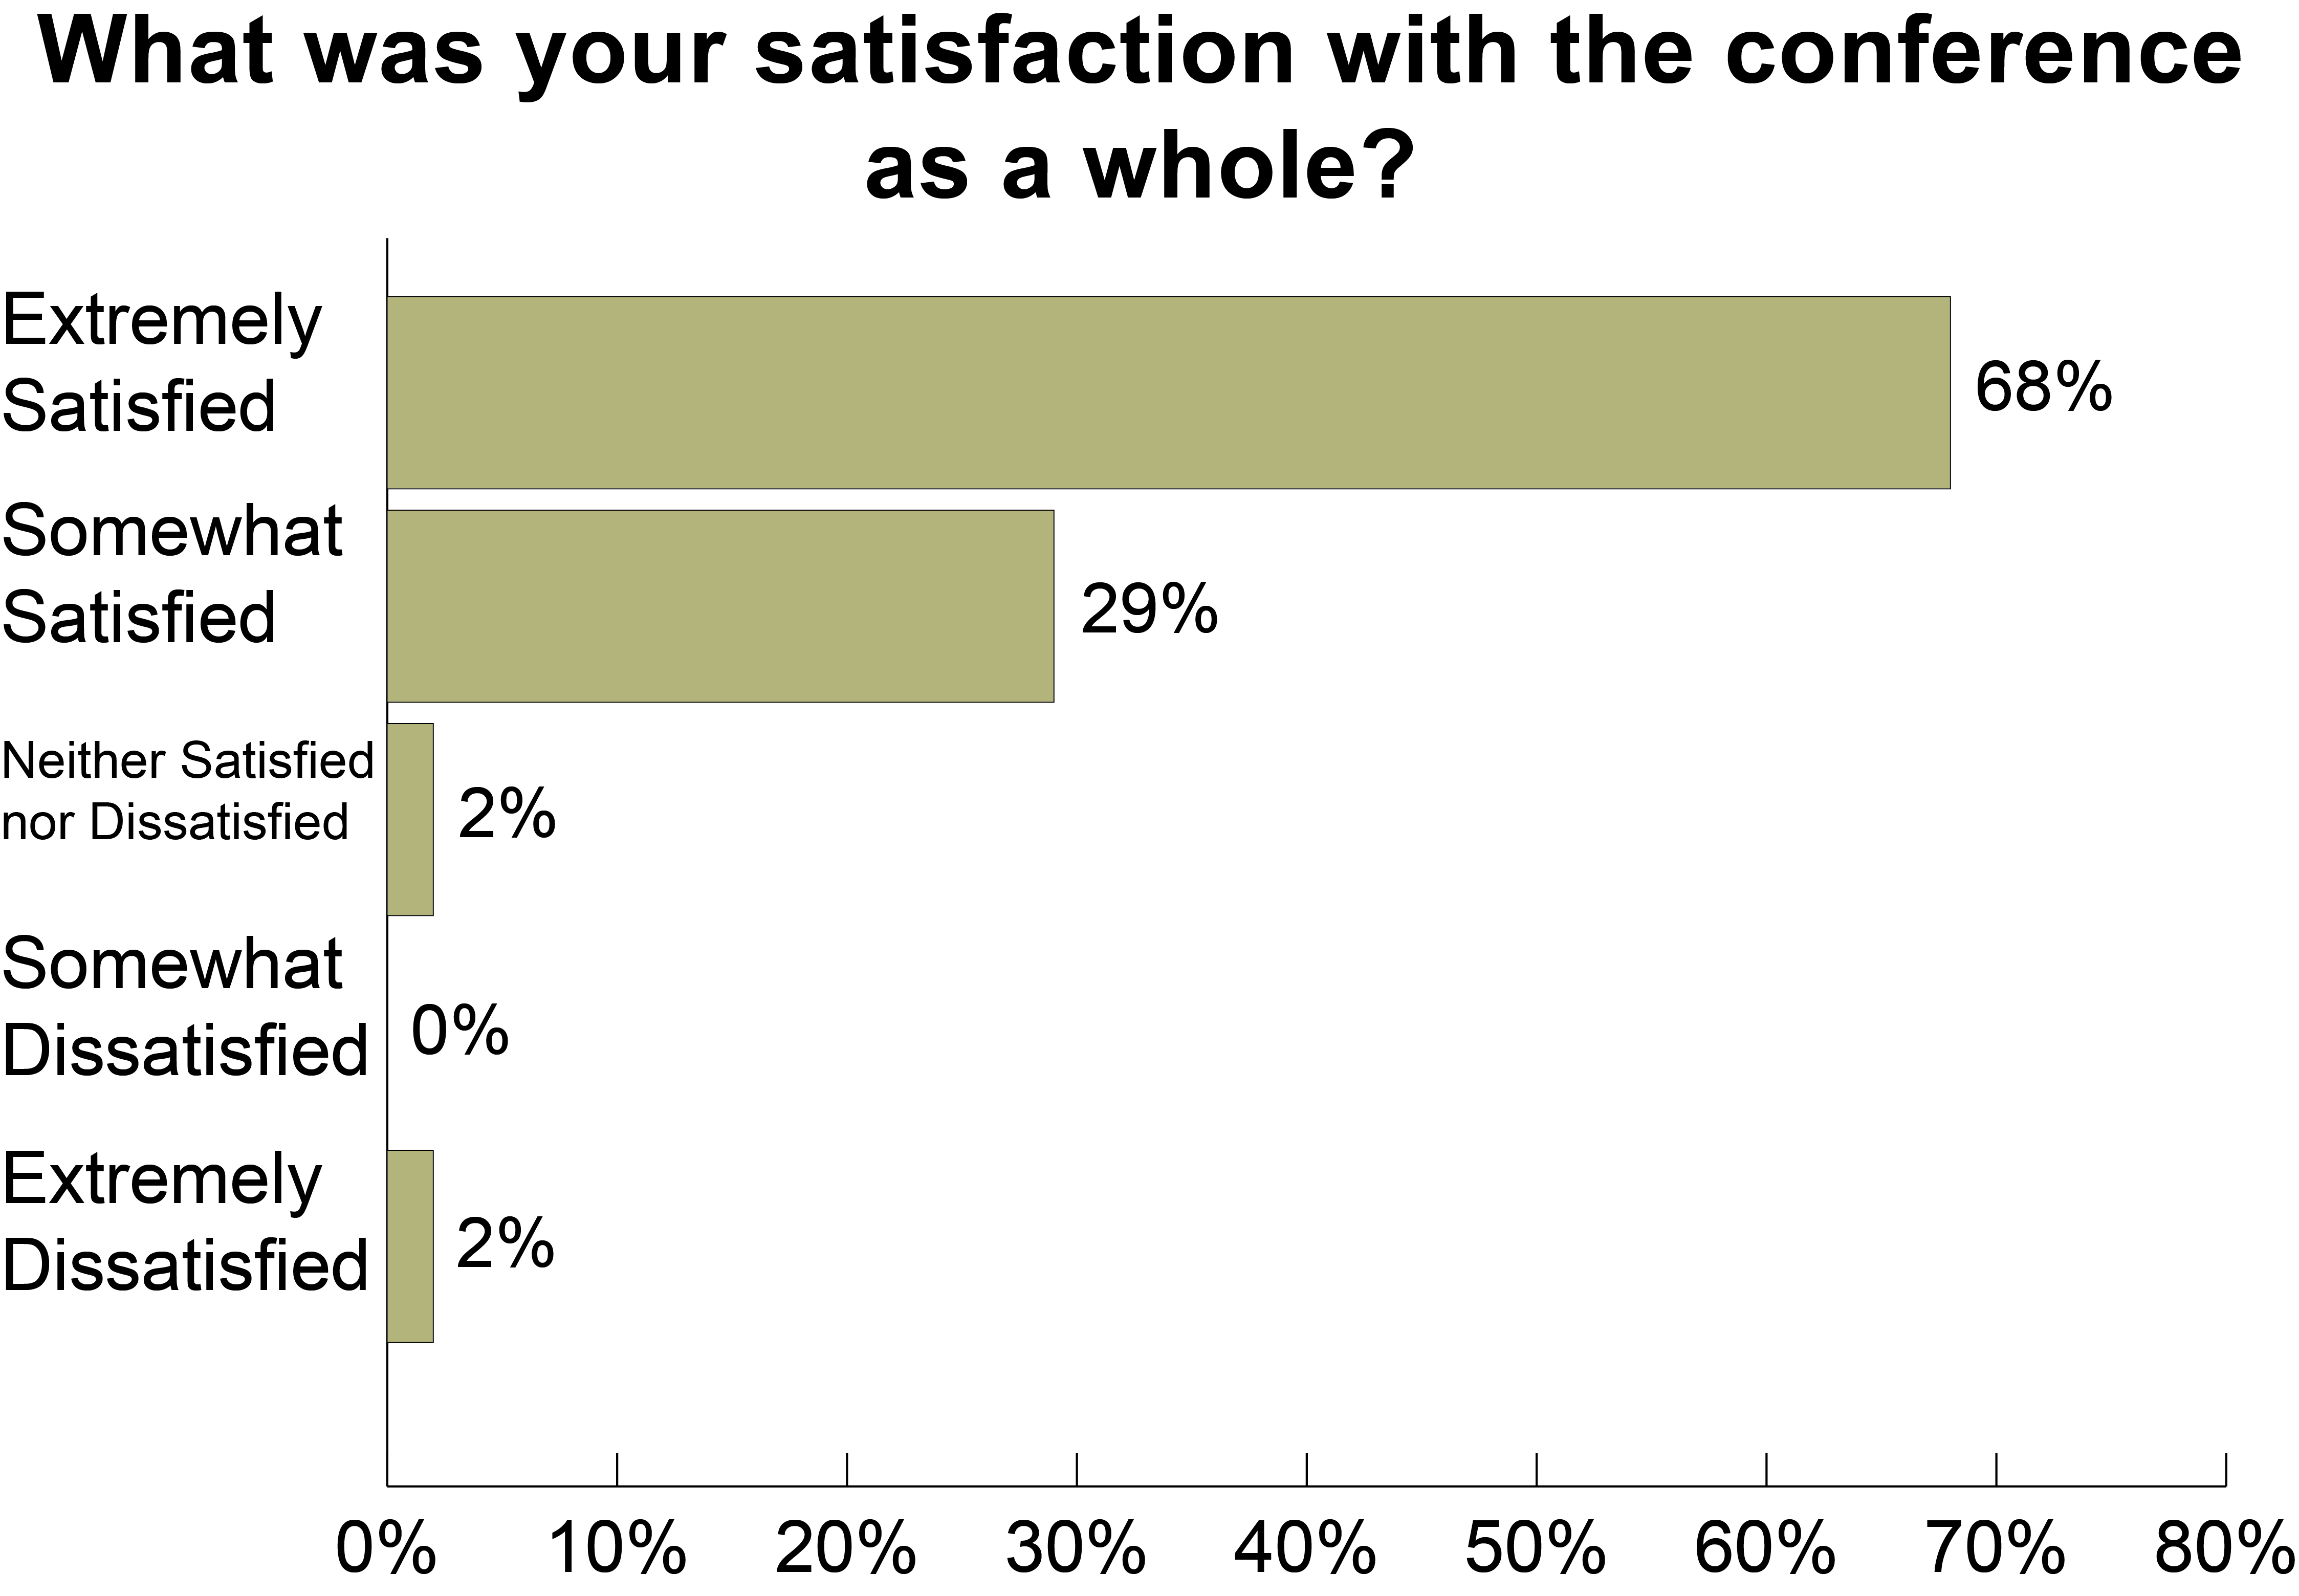 What was your satisfaction with the conference as a whole?